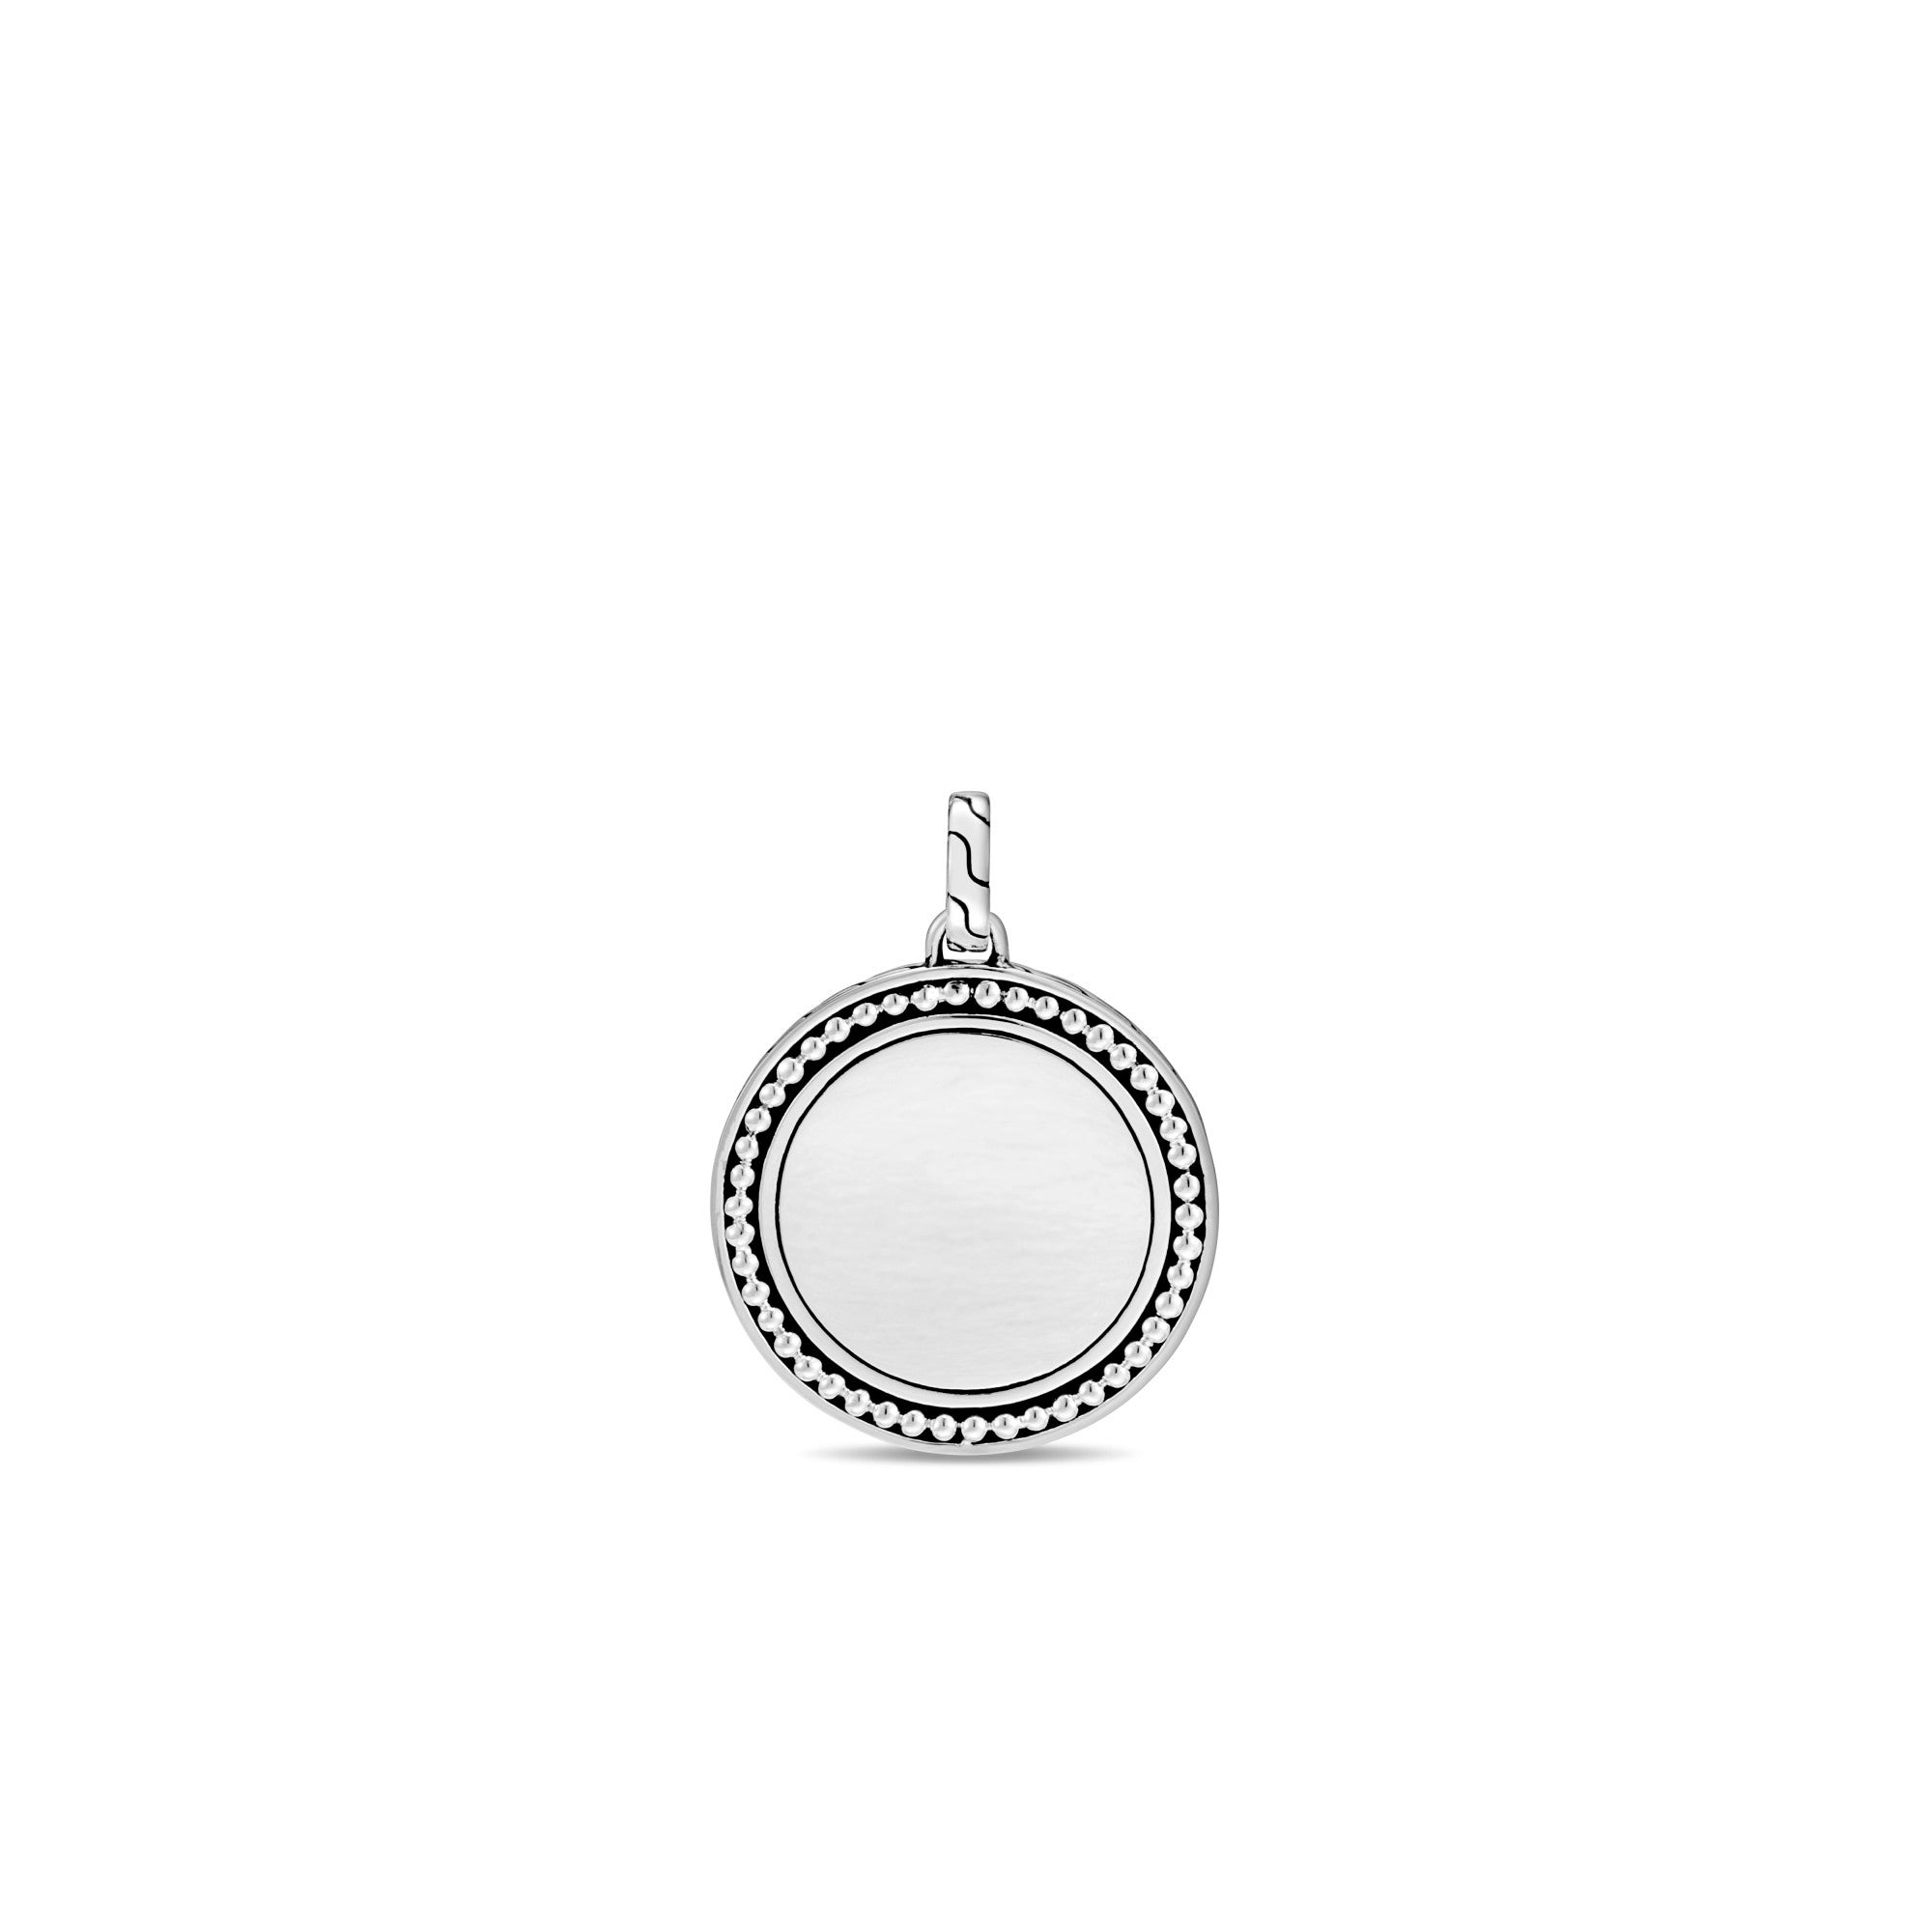 Carved Chain Silver|HB90449 John Pendant, – Hardy Sterling